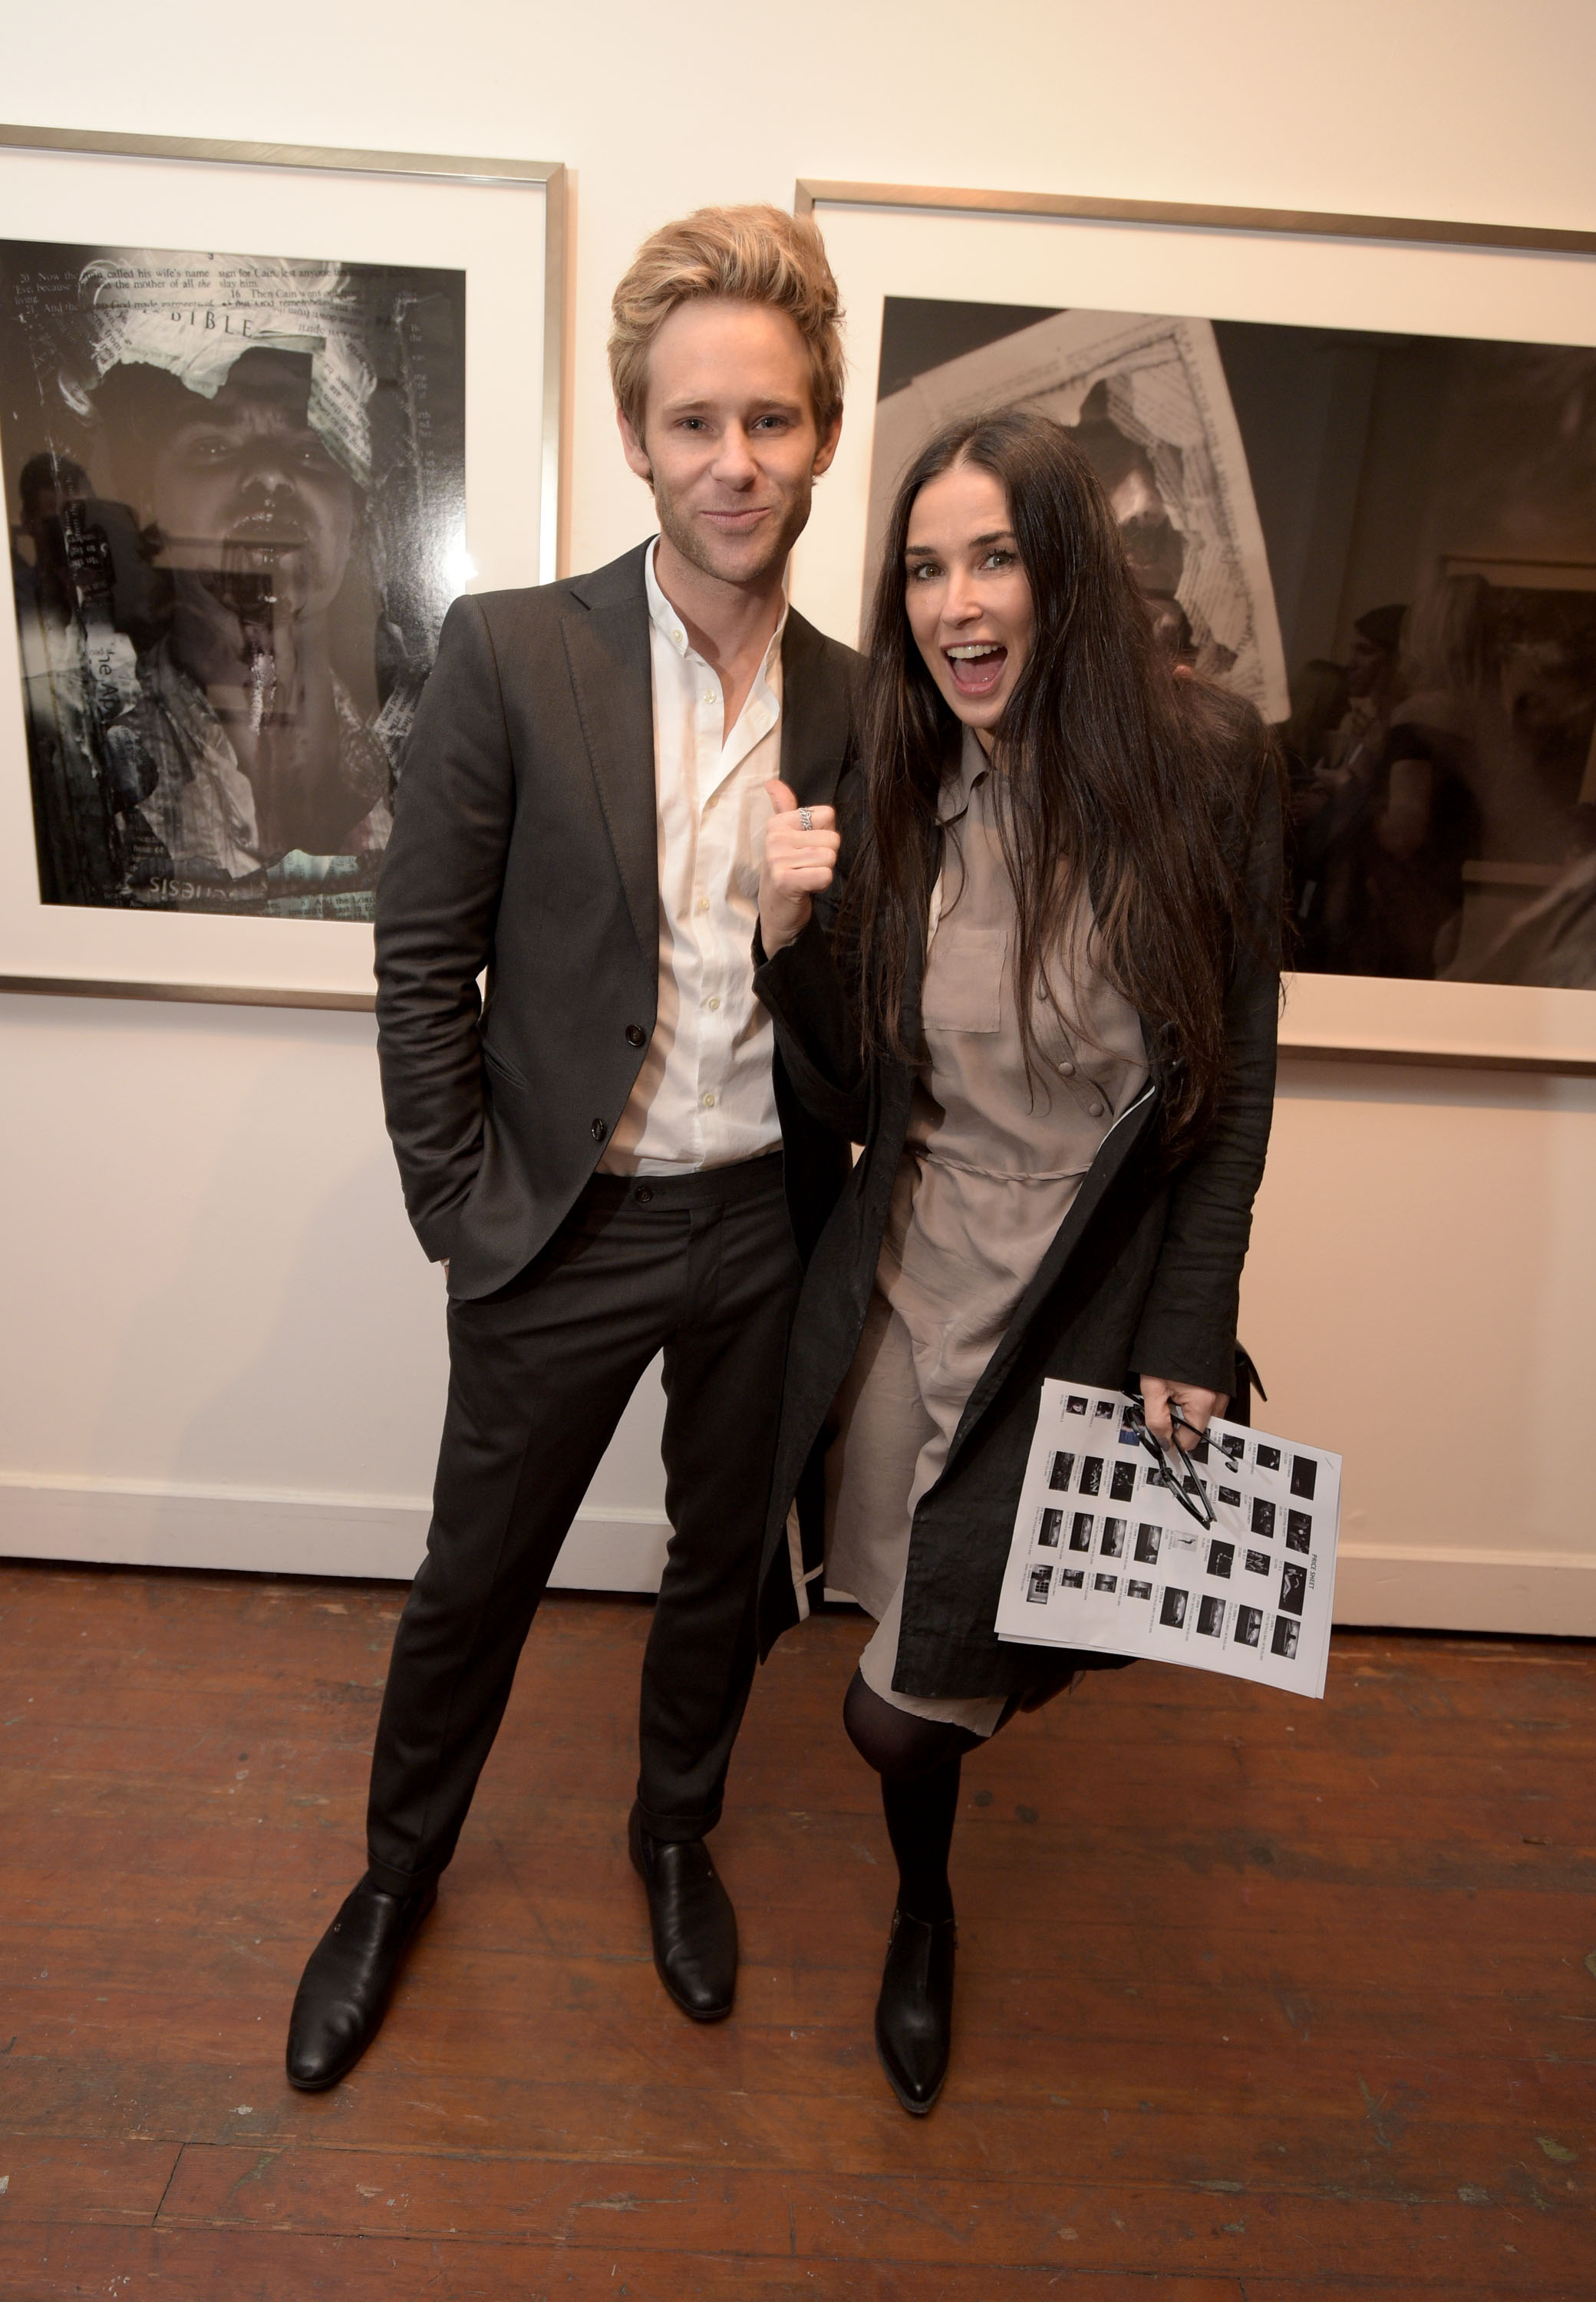 LOS ANGELES, CA - MAY 09: Artist Bryan Fox (L) and actress Demi Moore attend We. Alone. A photography exhibit by Bryan Fox at Think Tank Gallery on May 9, 2015 in Los Angeles, California. (Photo by Jason Kempin/Getty Images for Bryan Fox)